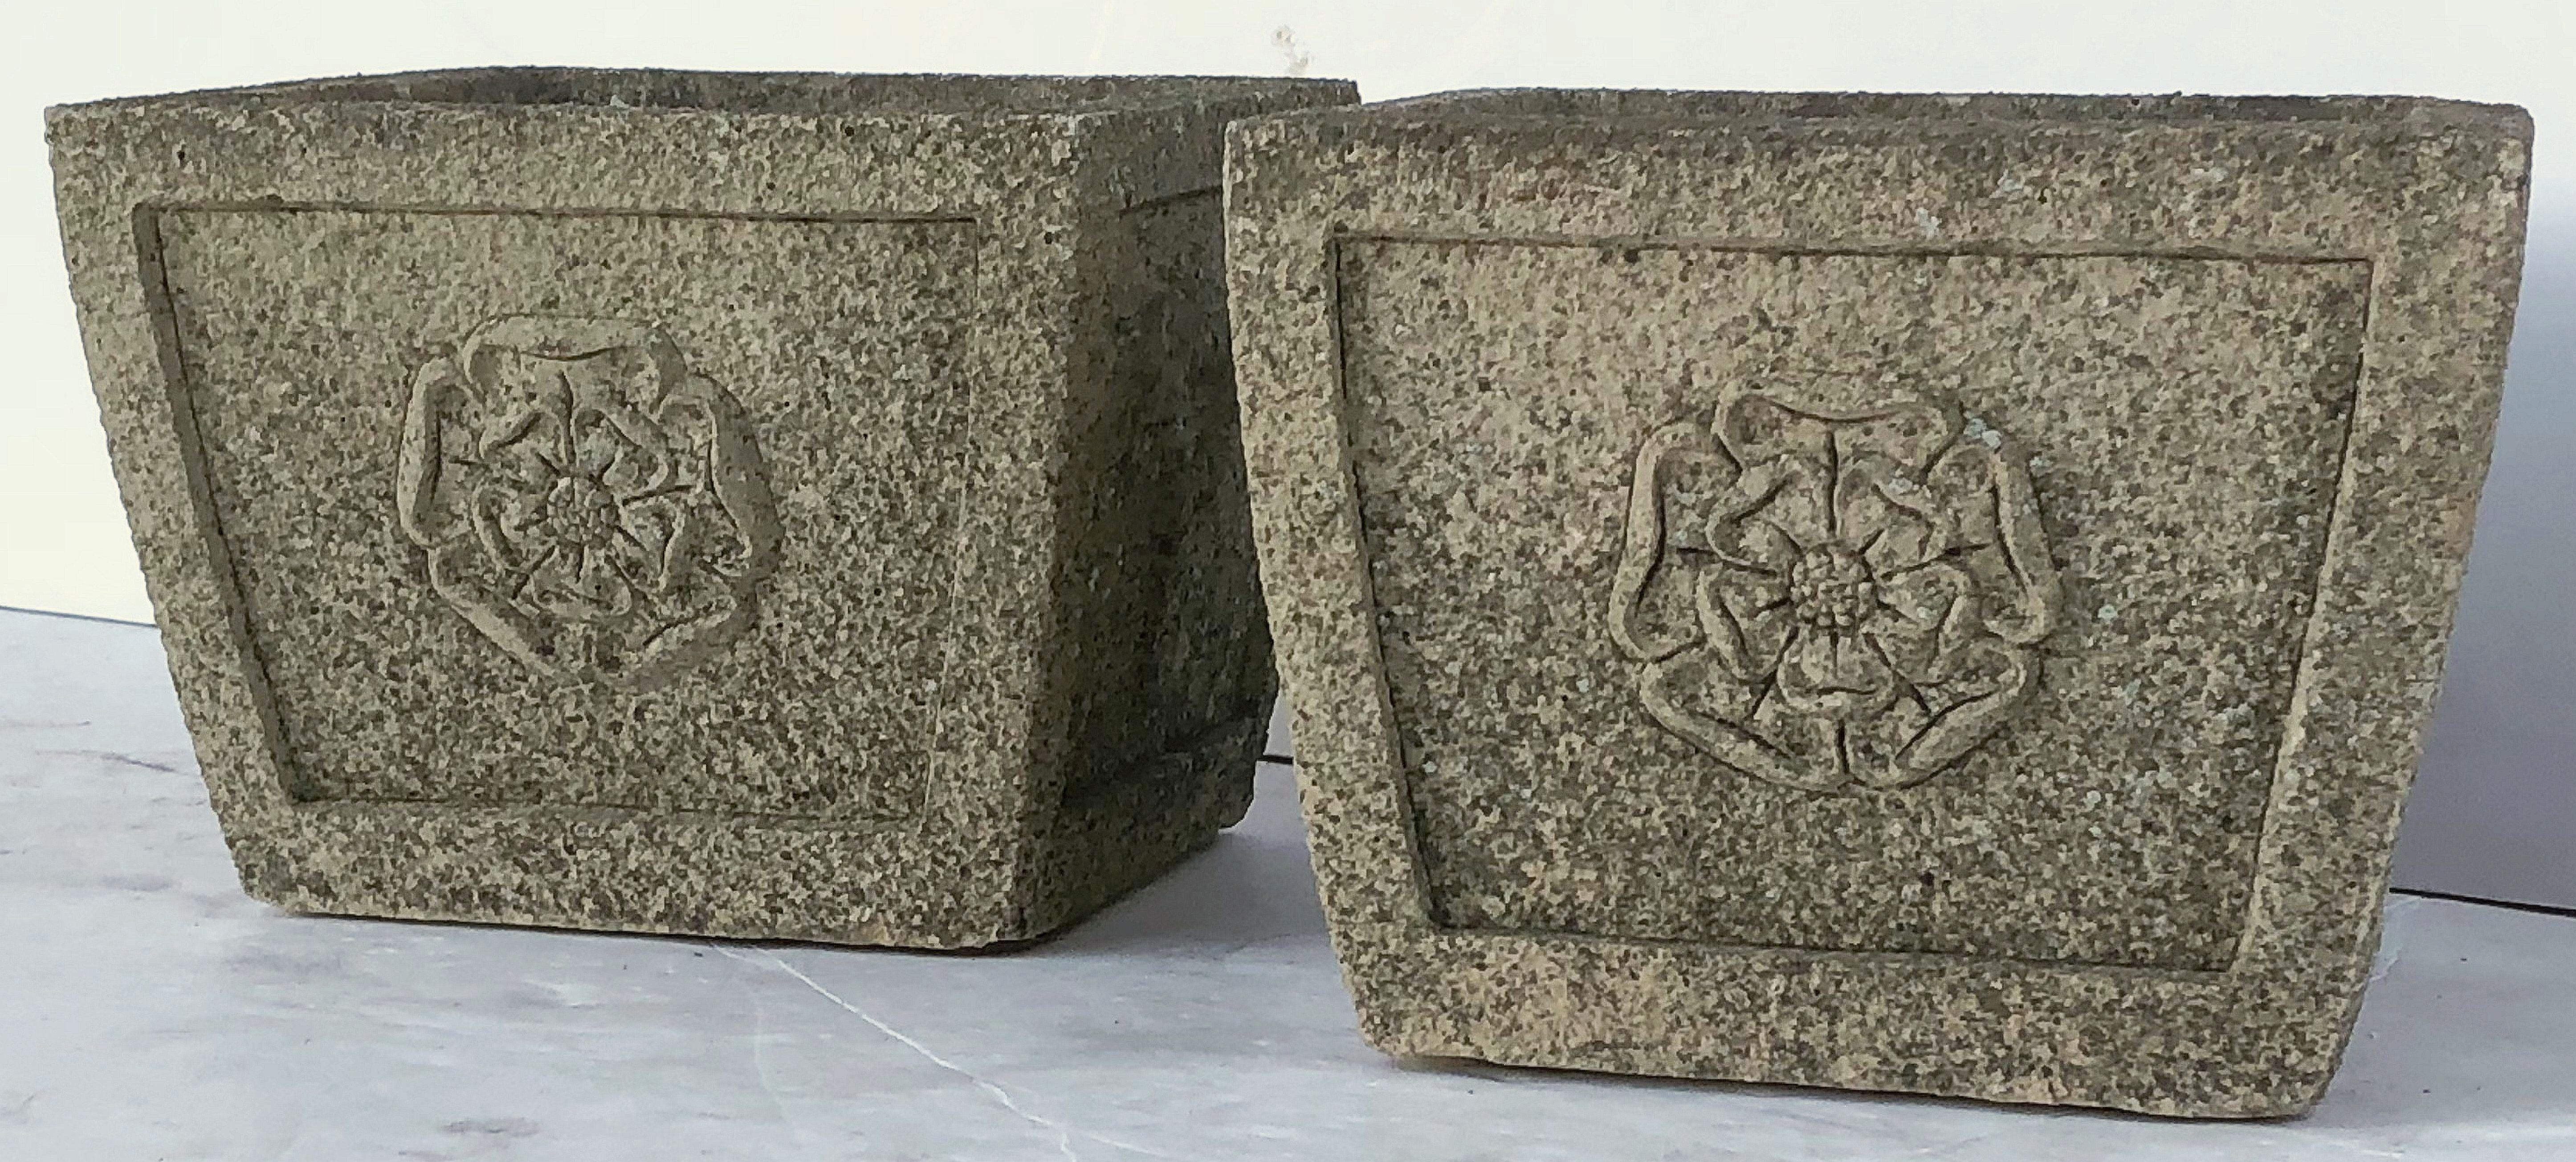 English Garden Stone Cotswold Pots or Planters 'Individually Priced' 3